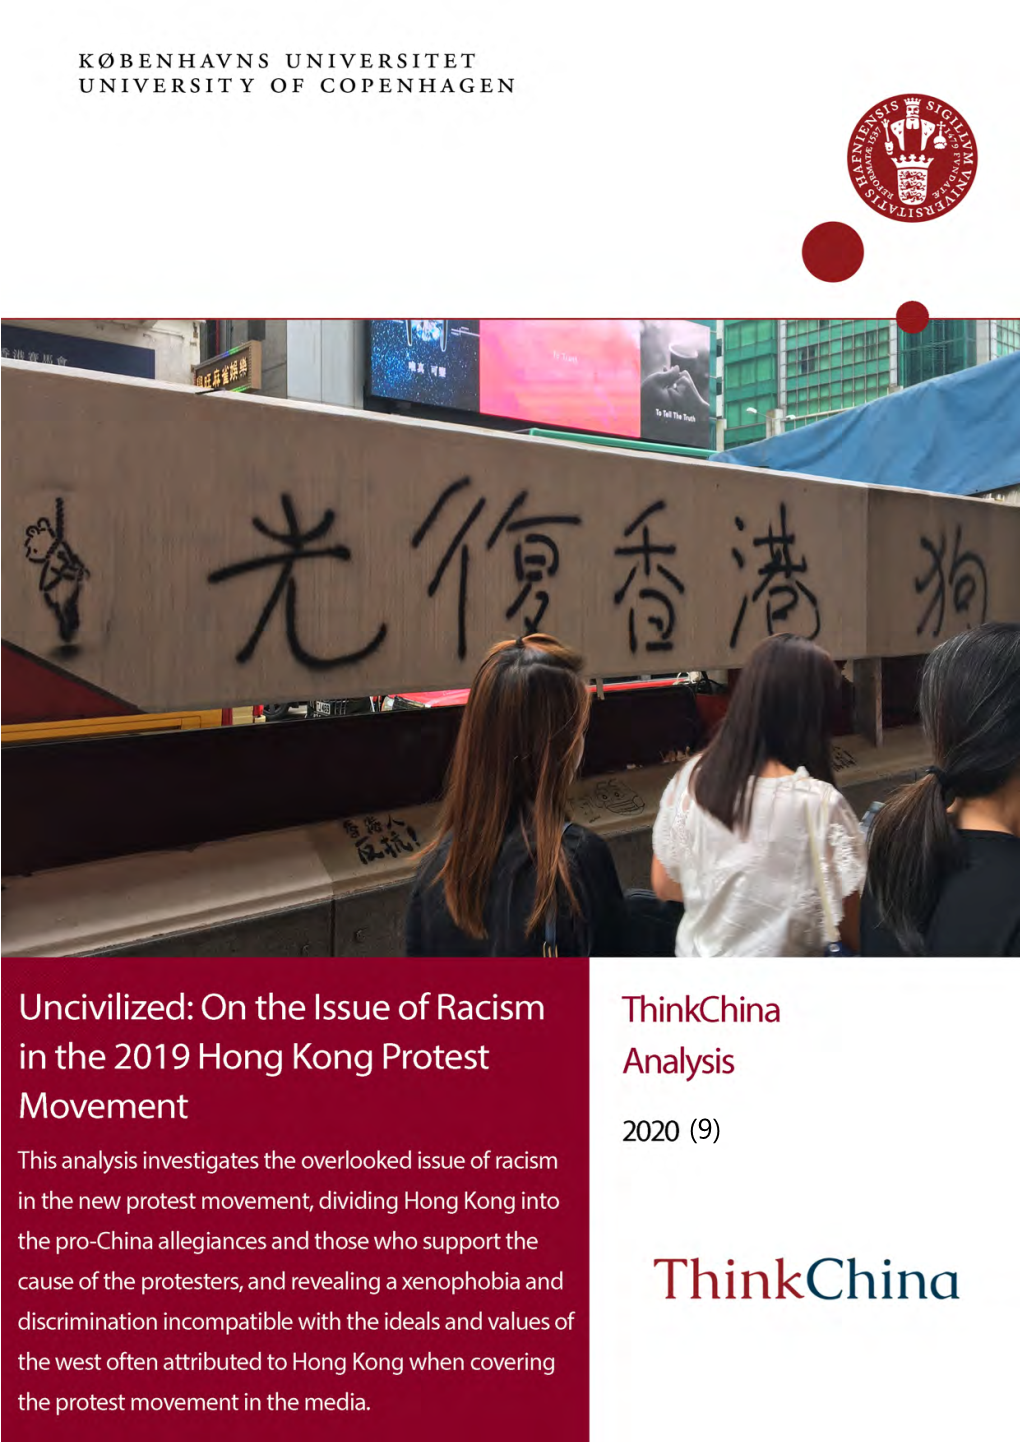 Uncivilized: on the Issue of Racism in the 2019 Hong Kong Protest Movement